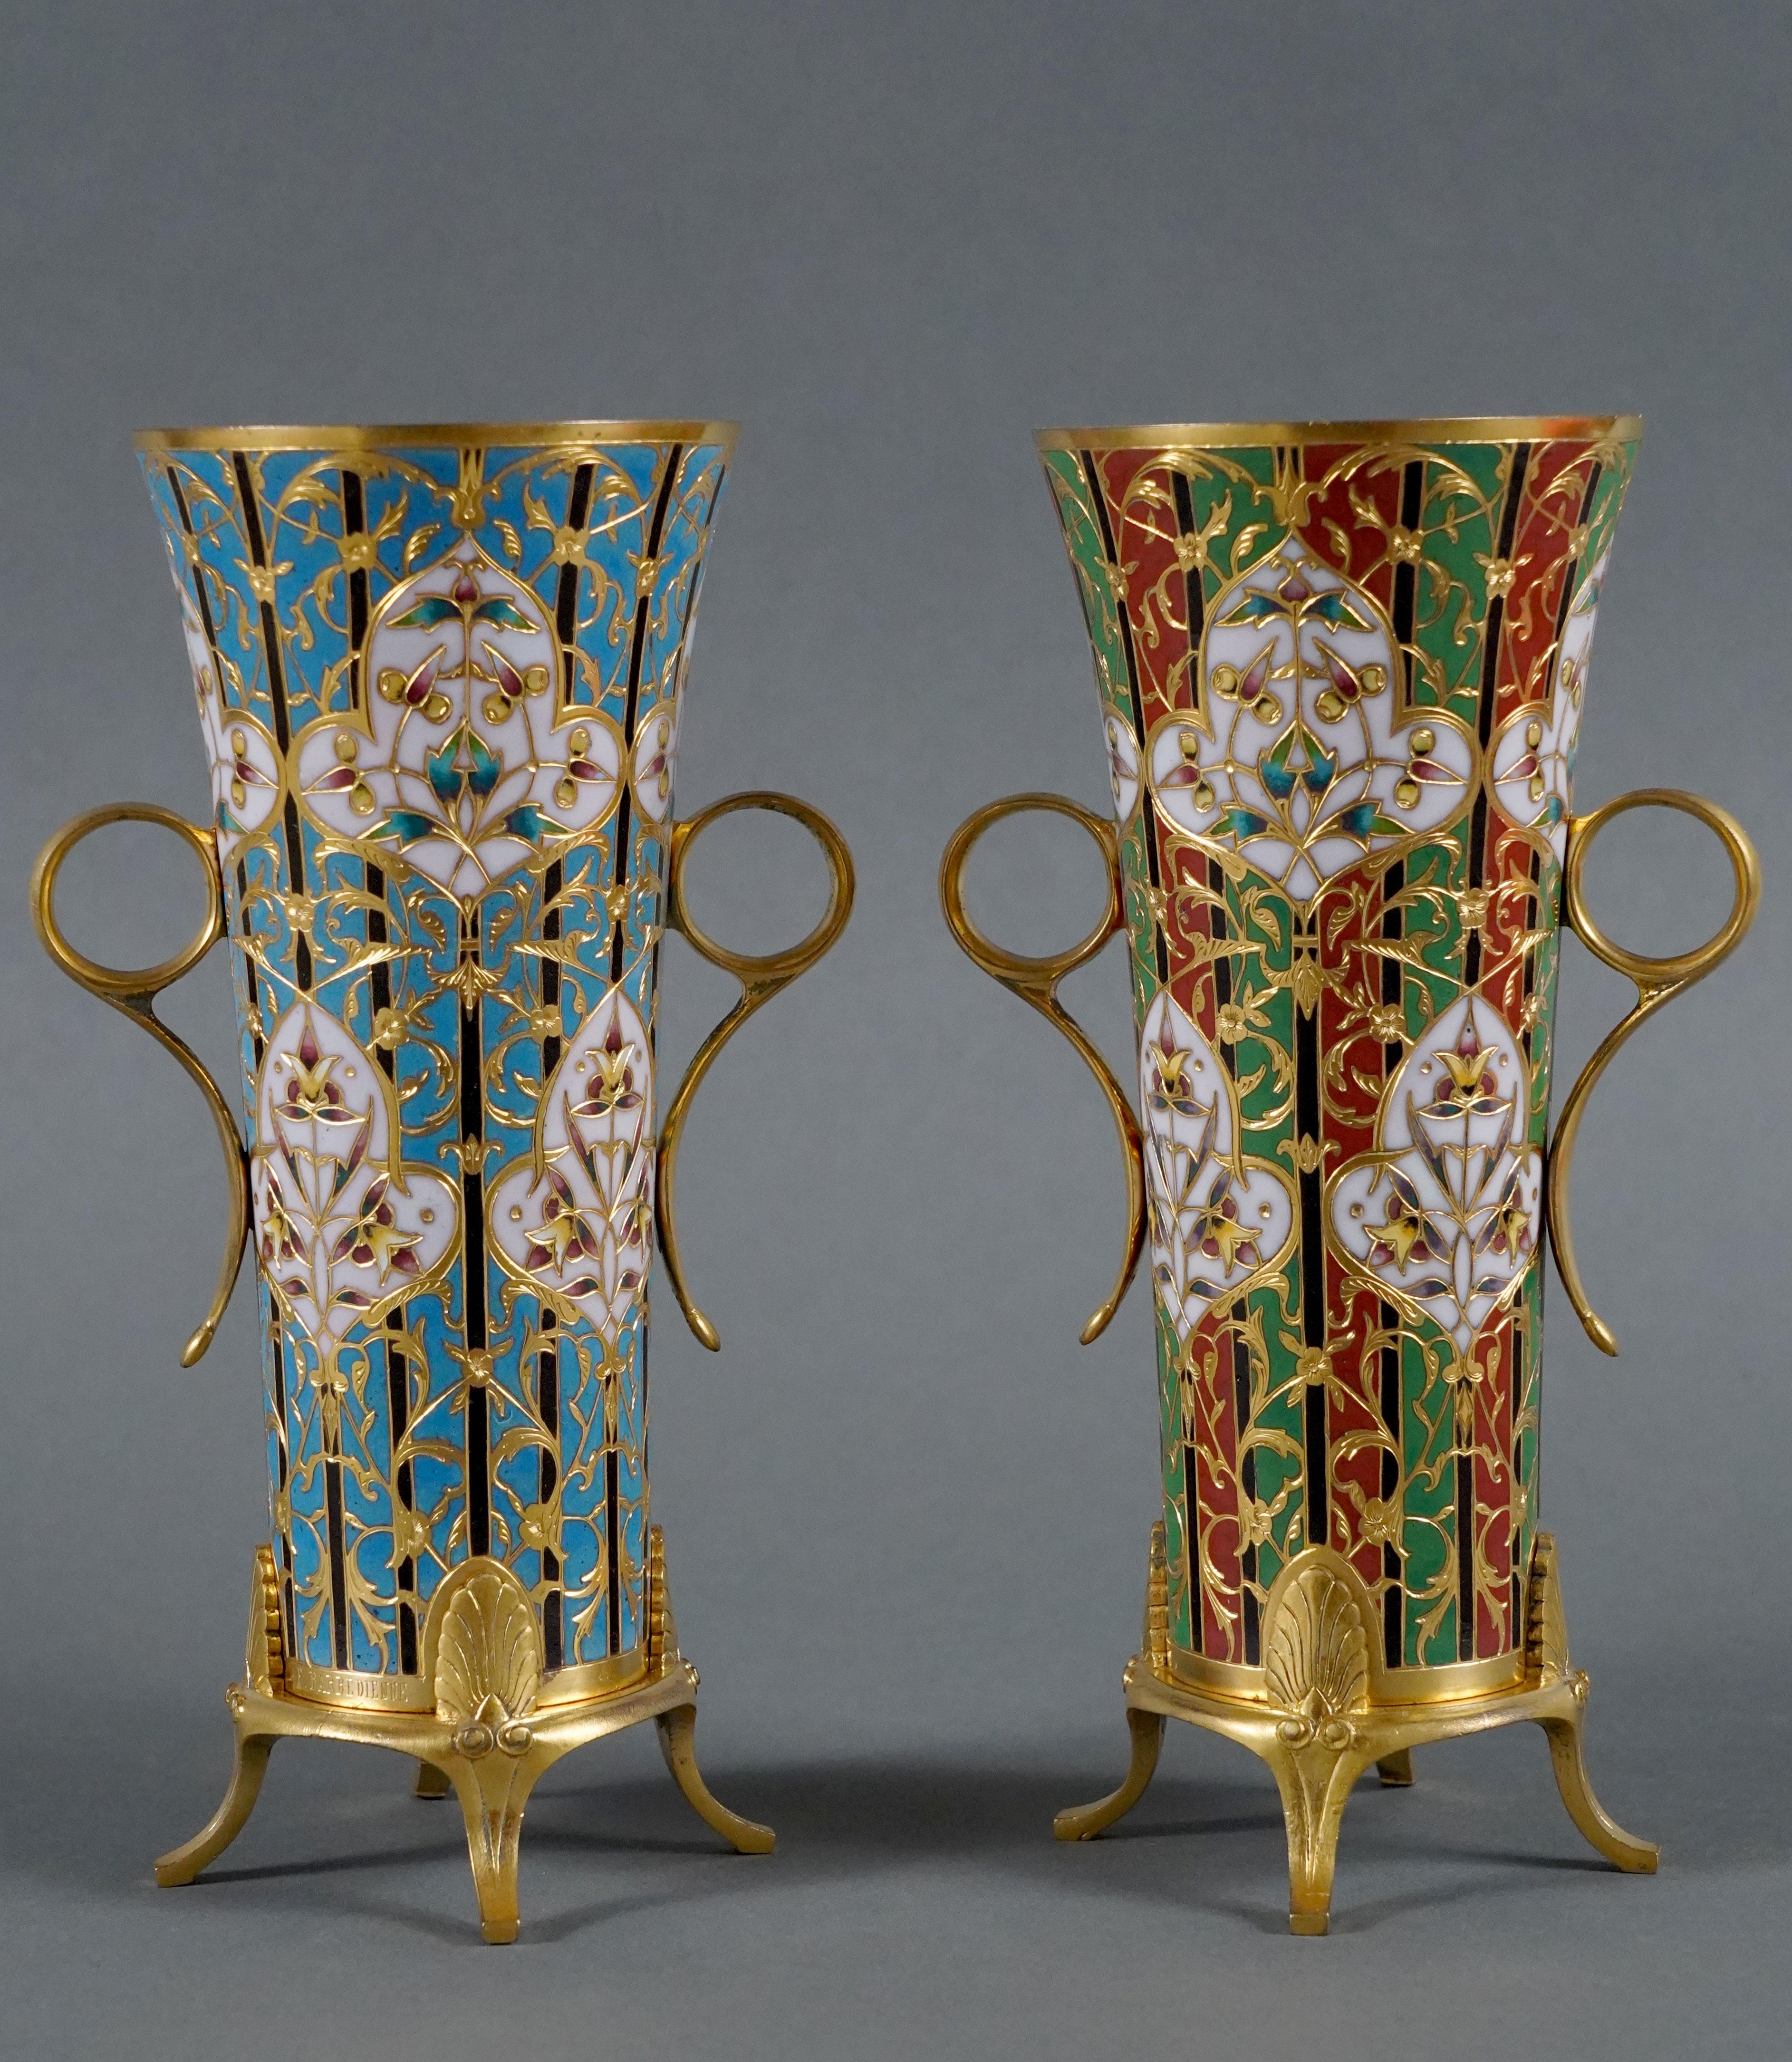 Signed F. Barbedienne

A pair of charming  trumpet-shaped vases in gilt bronze with a polychrome cloisonné enamel decoration, one blue and the other green and red. They feature two annular handles and stand on four feet surmounted by a stylized